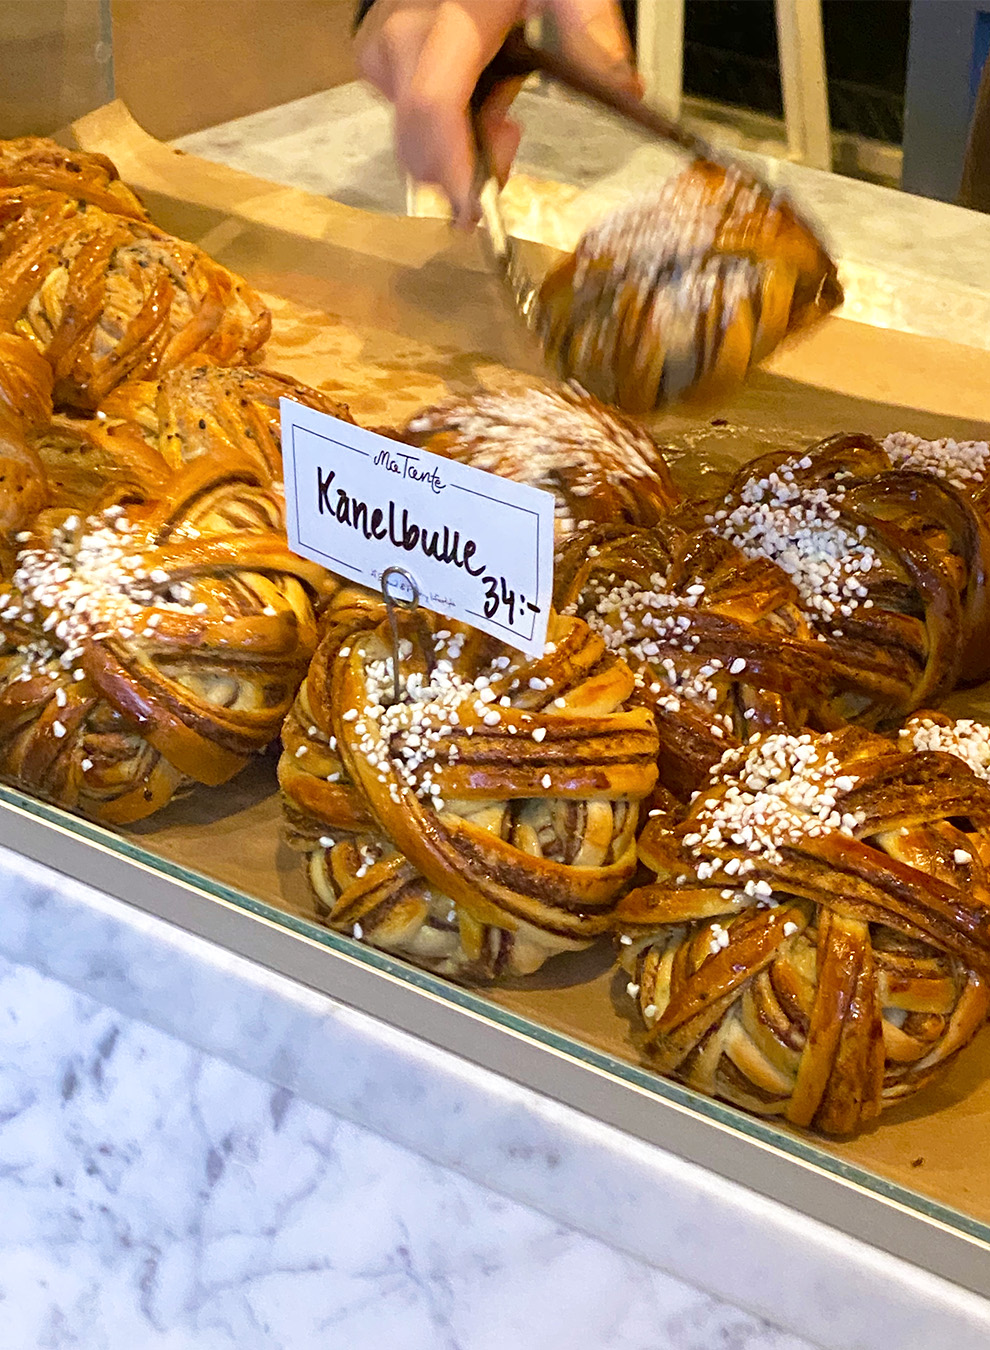 The traditional Swedish pastry Kanelbulle at the Ostermalms Saluhall market in Stockholm